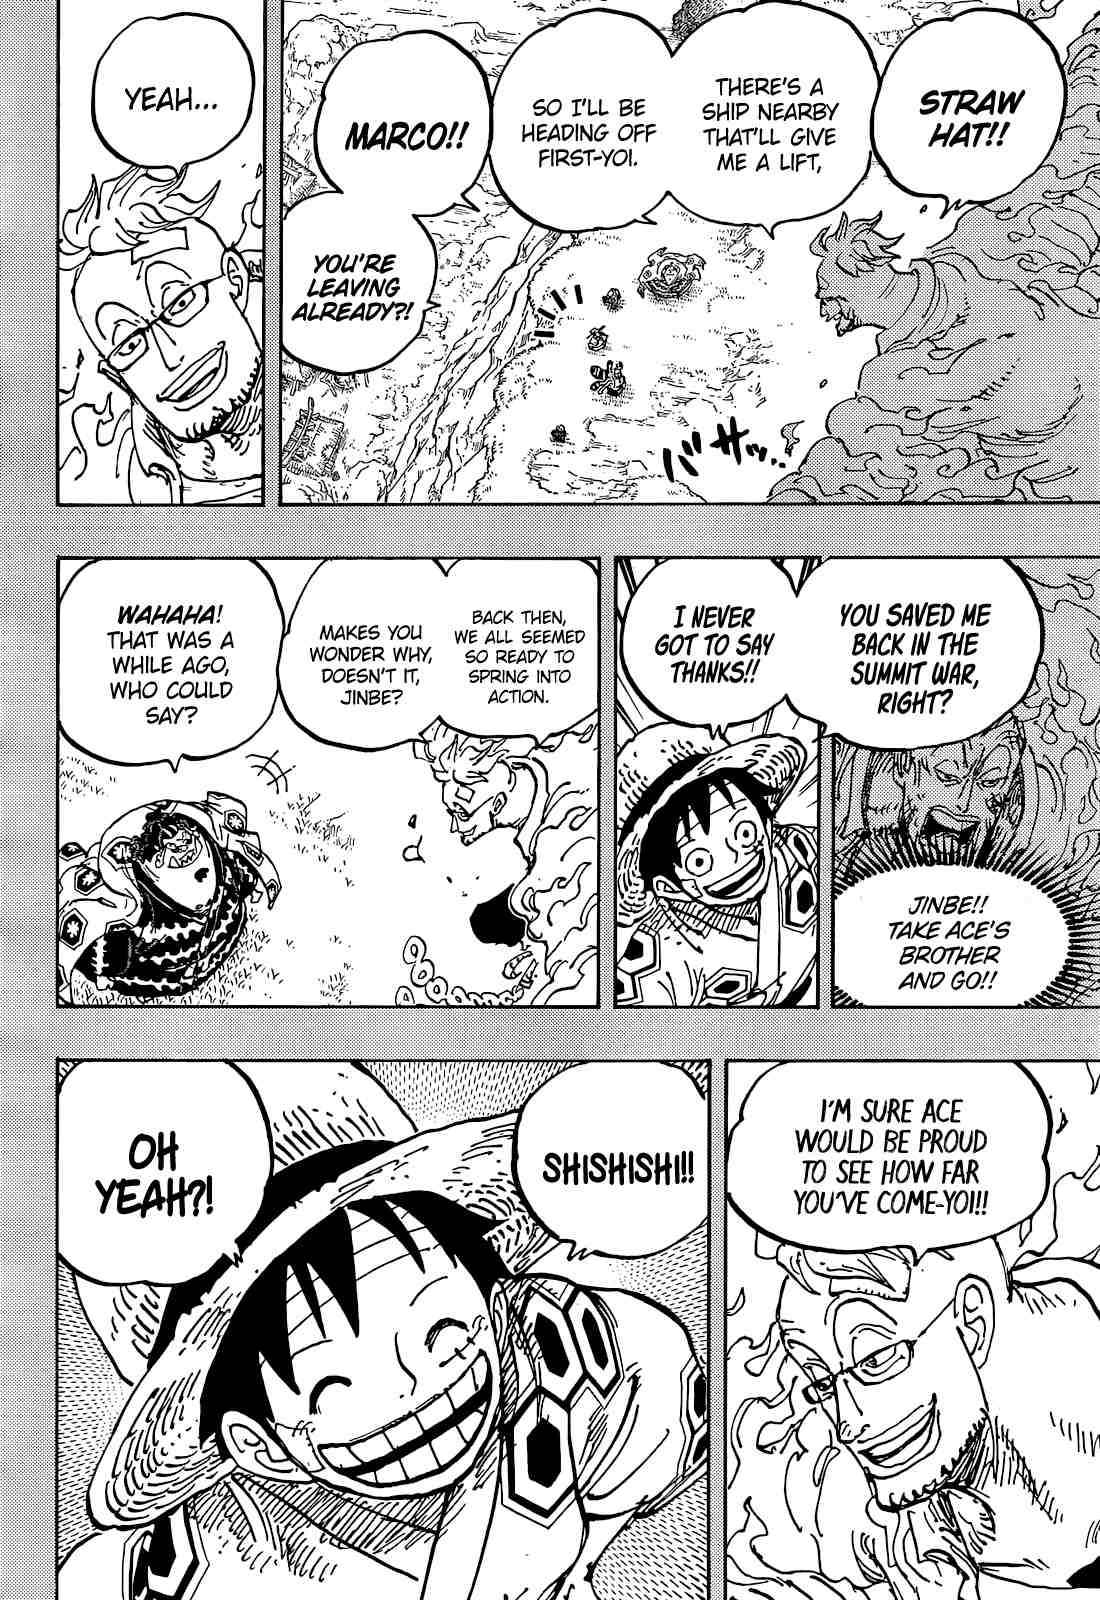 One Piece chapter 1059: date, time and where to read online in